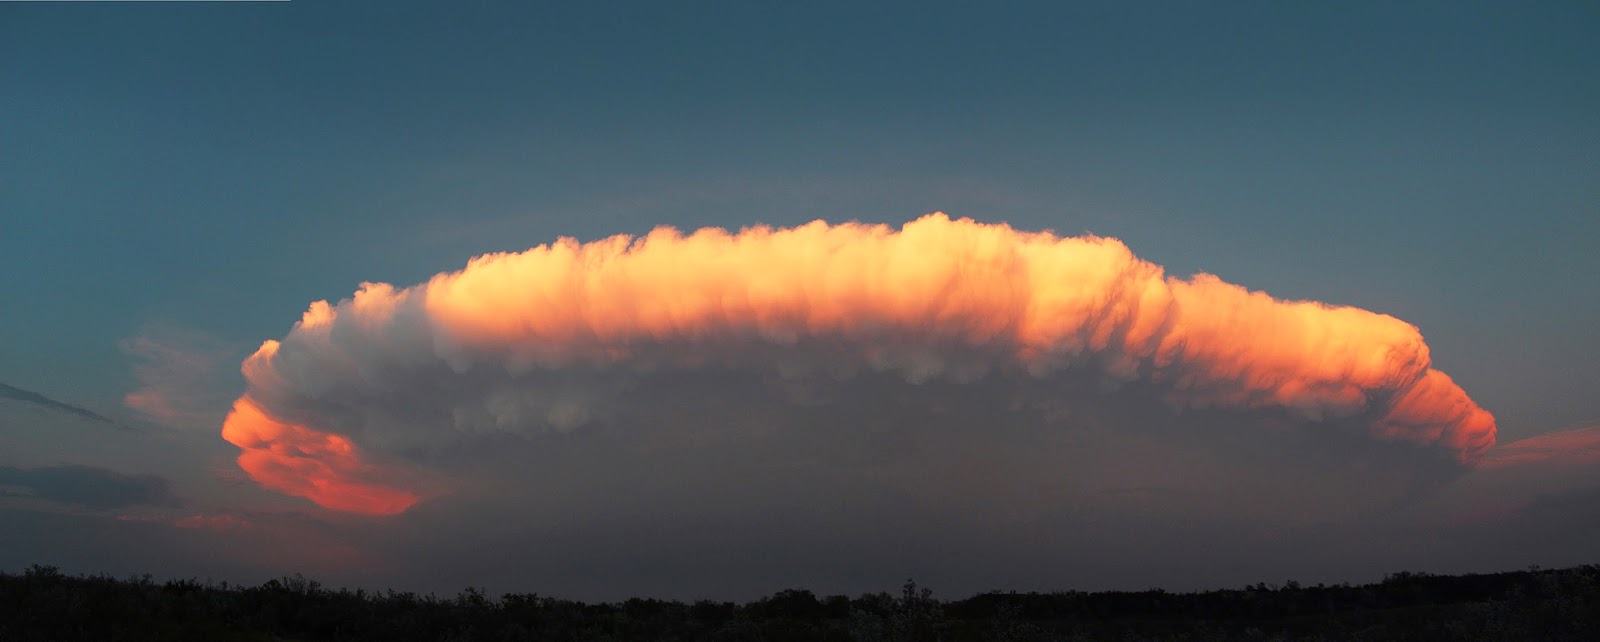 Cumulonimbus Cloud over Texas Cumulonimbus Cloud over Texas   A little later, as the sunset, the storm looks quite different. This kind of complete view of a thunderstorm cloud is typical of the US Great Plains.  Texas, United States May, 2012  Image Credit & Copyright: Kay Cunninghan